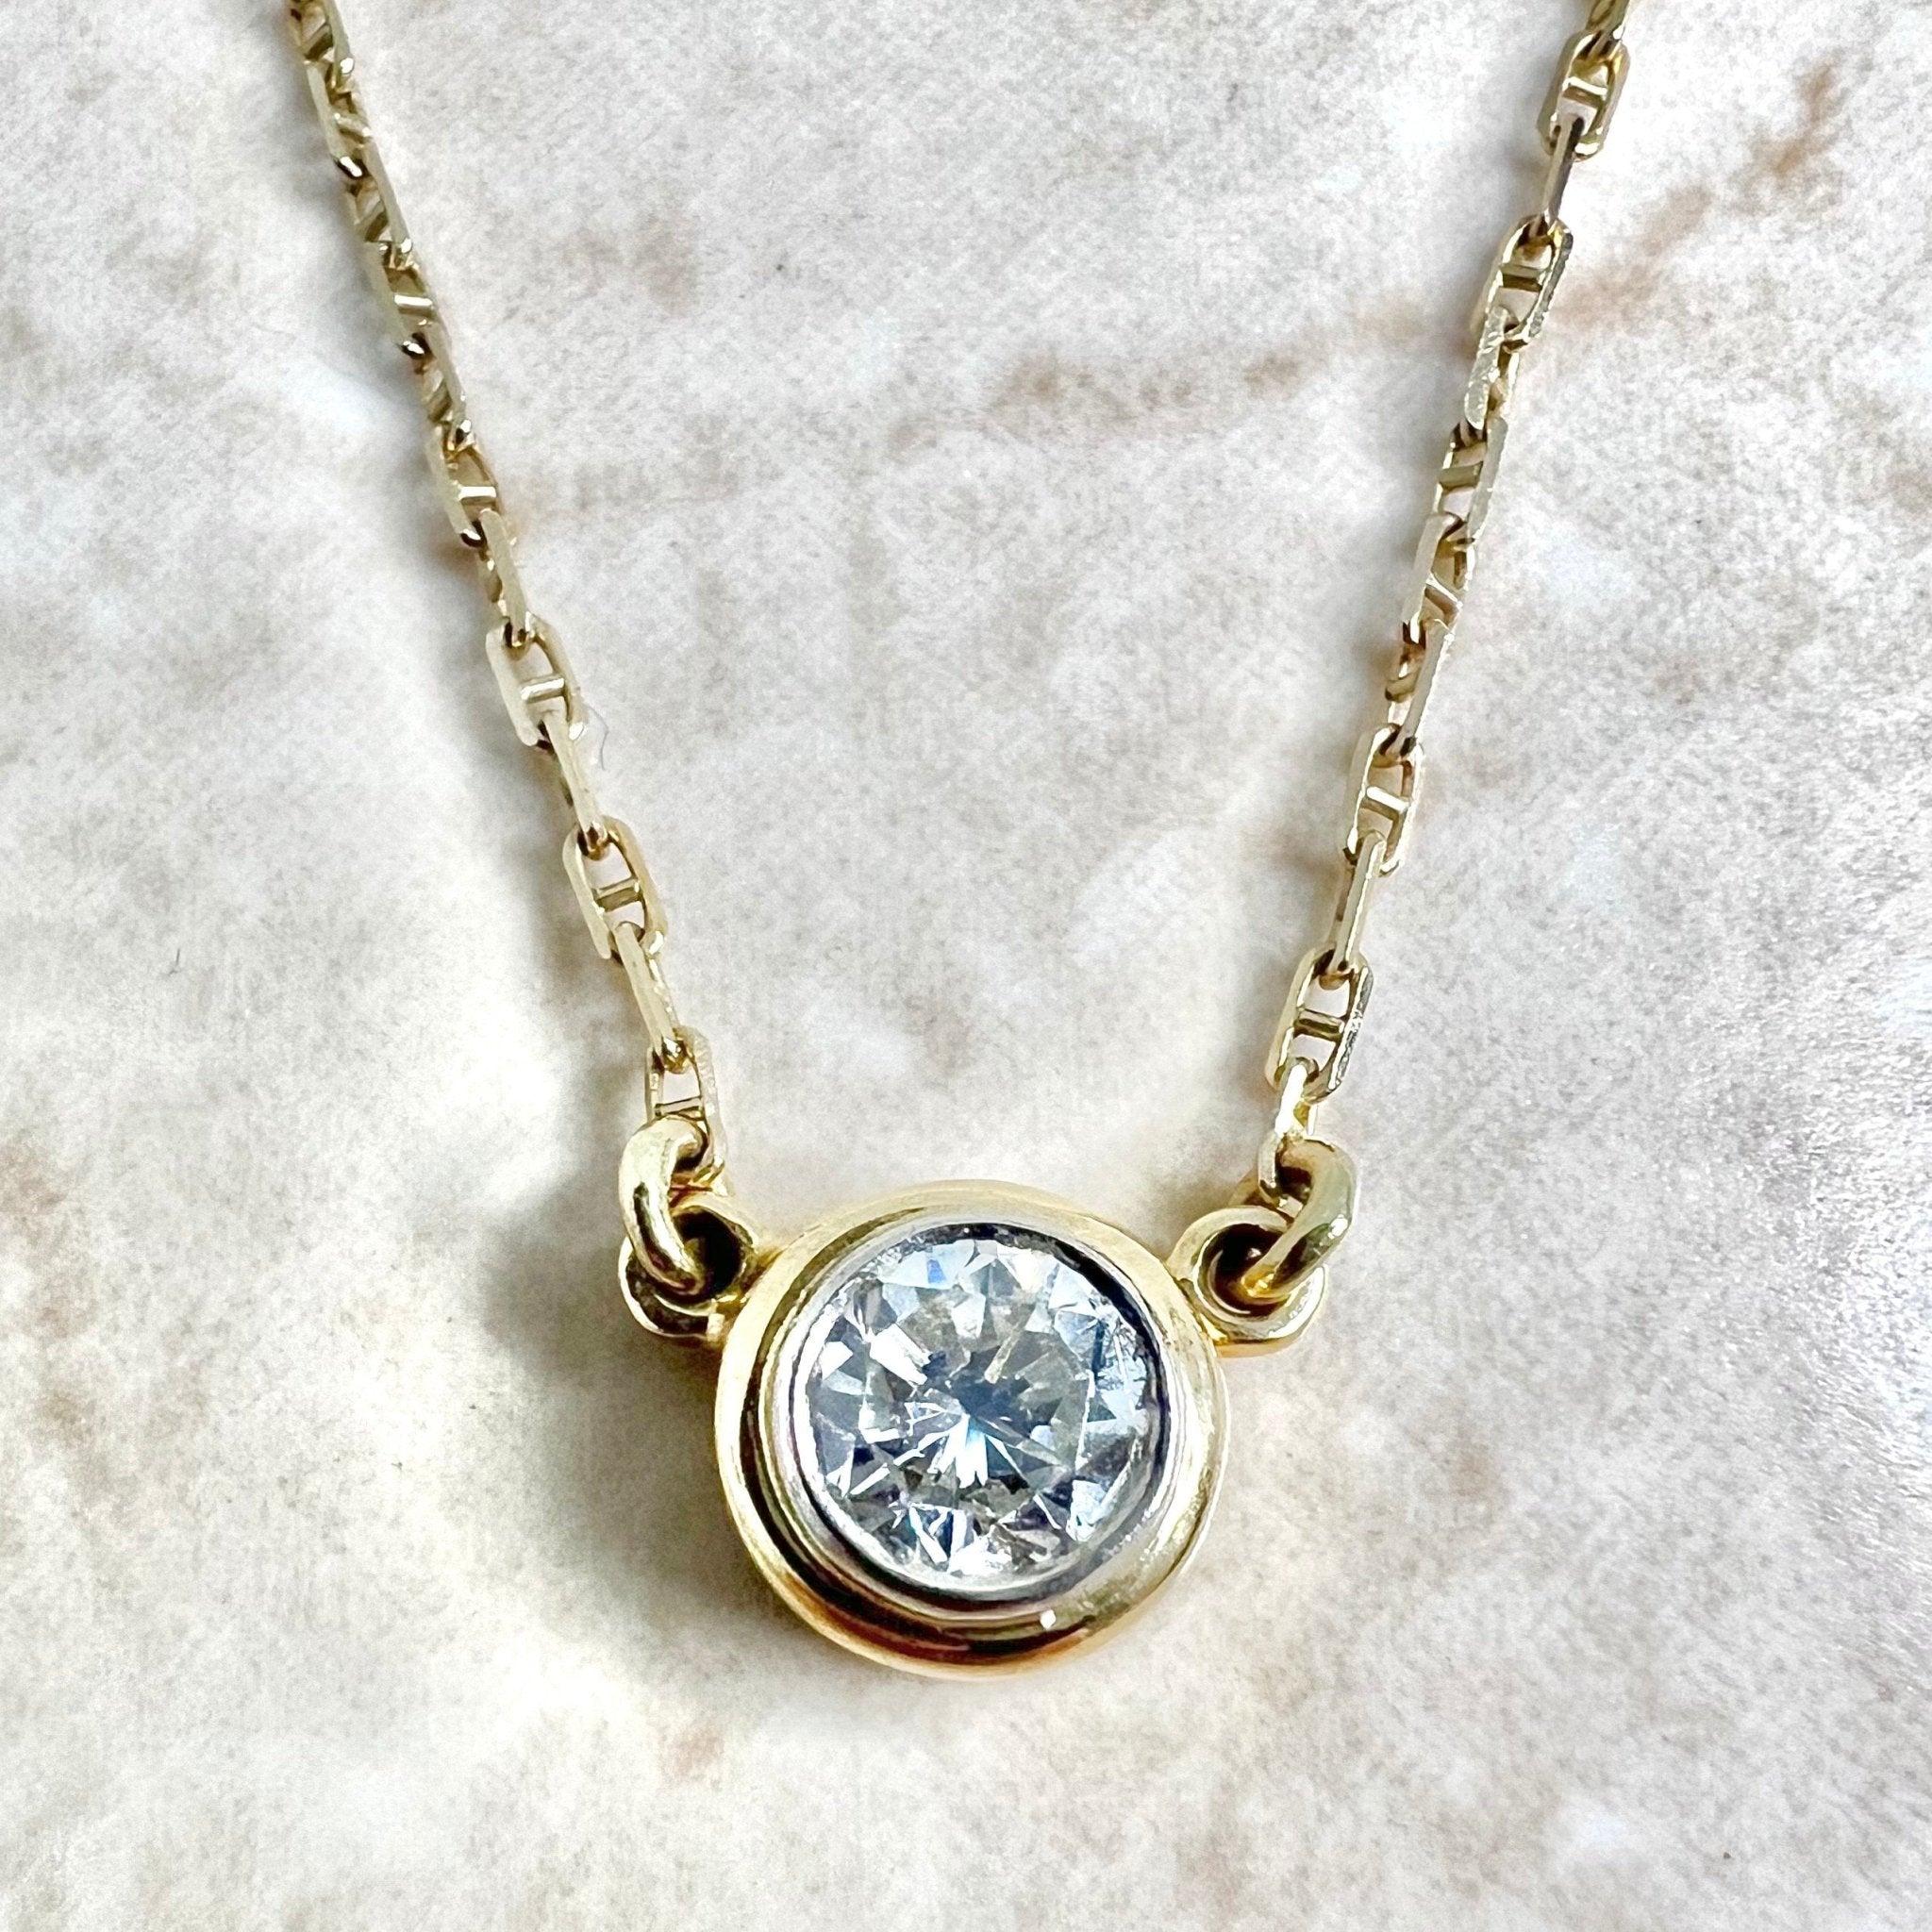 2 Carat Moval Diamond Bezel Solitaire Necklace in 18k Yellow Gold